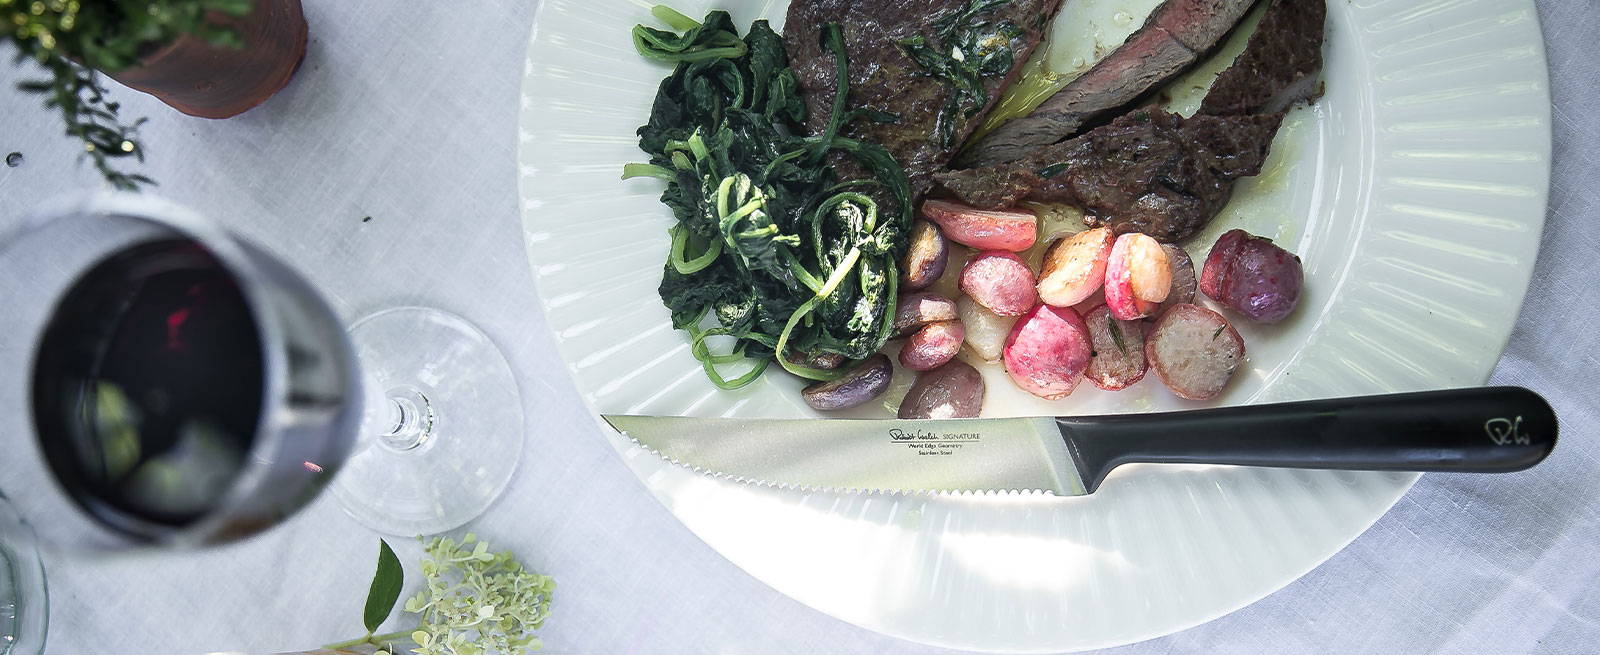 Rump steak with garden herb butter and sauteed radishes